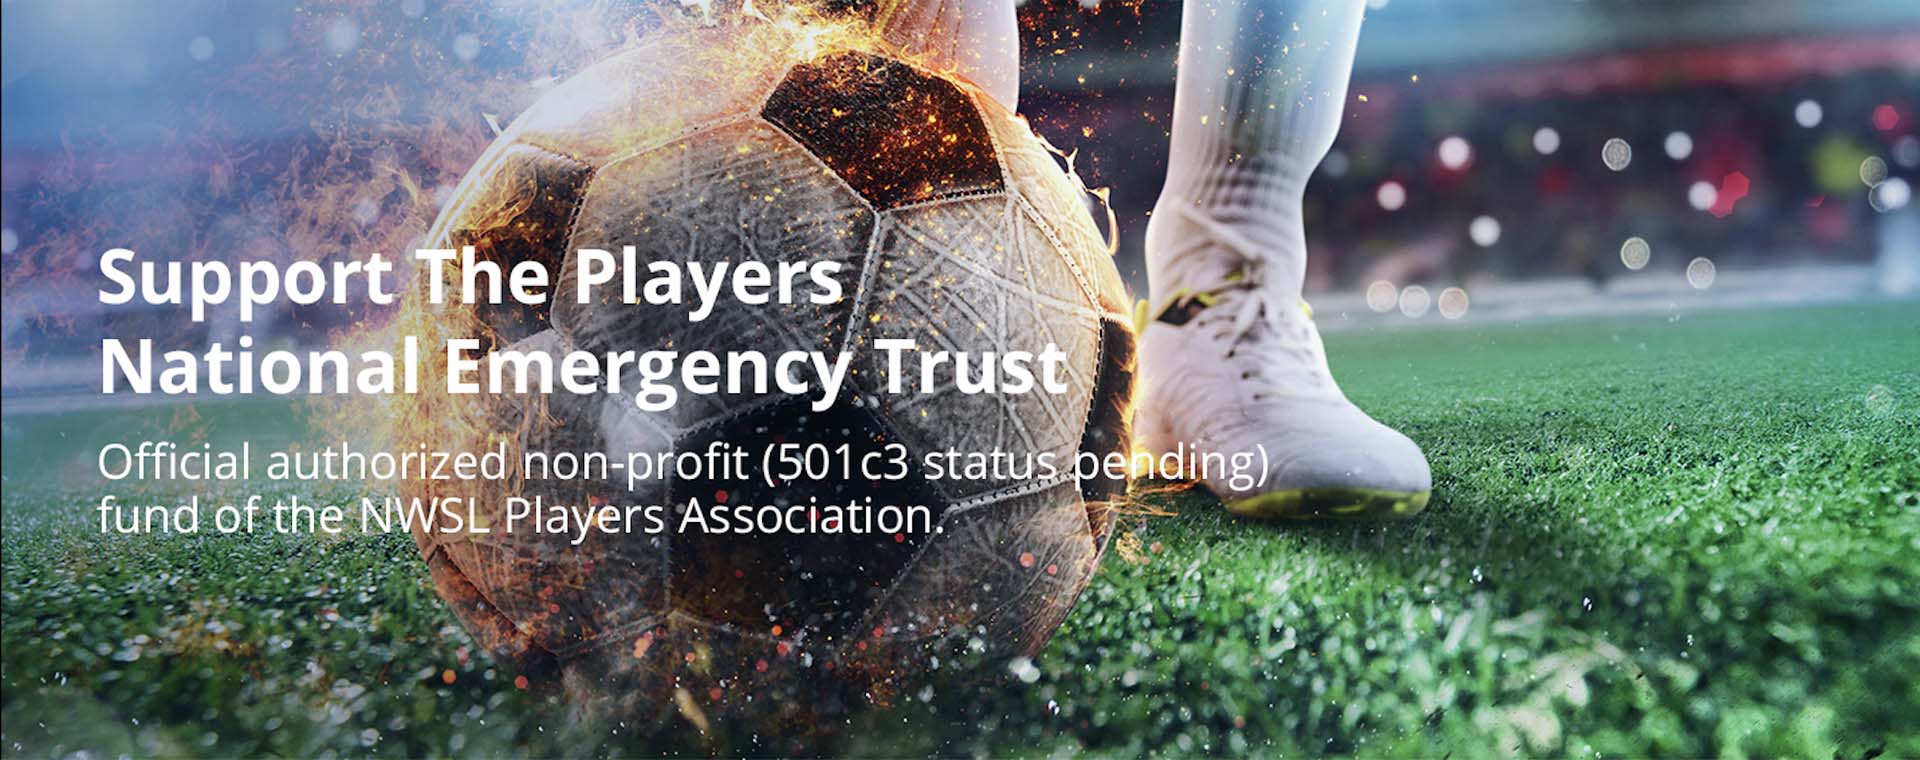 Support the Players National Emergency Trust